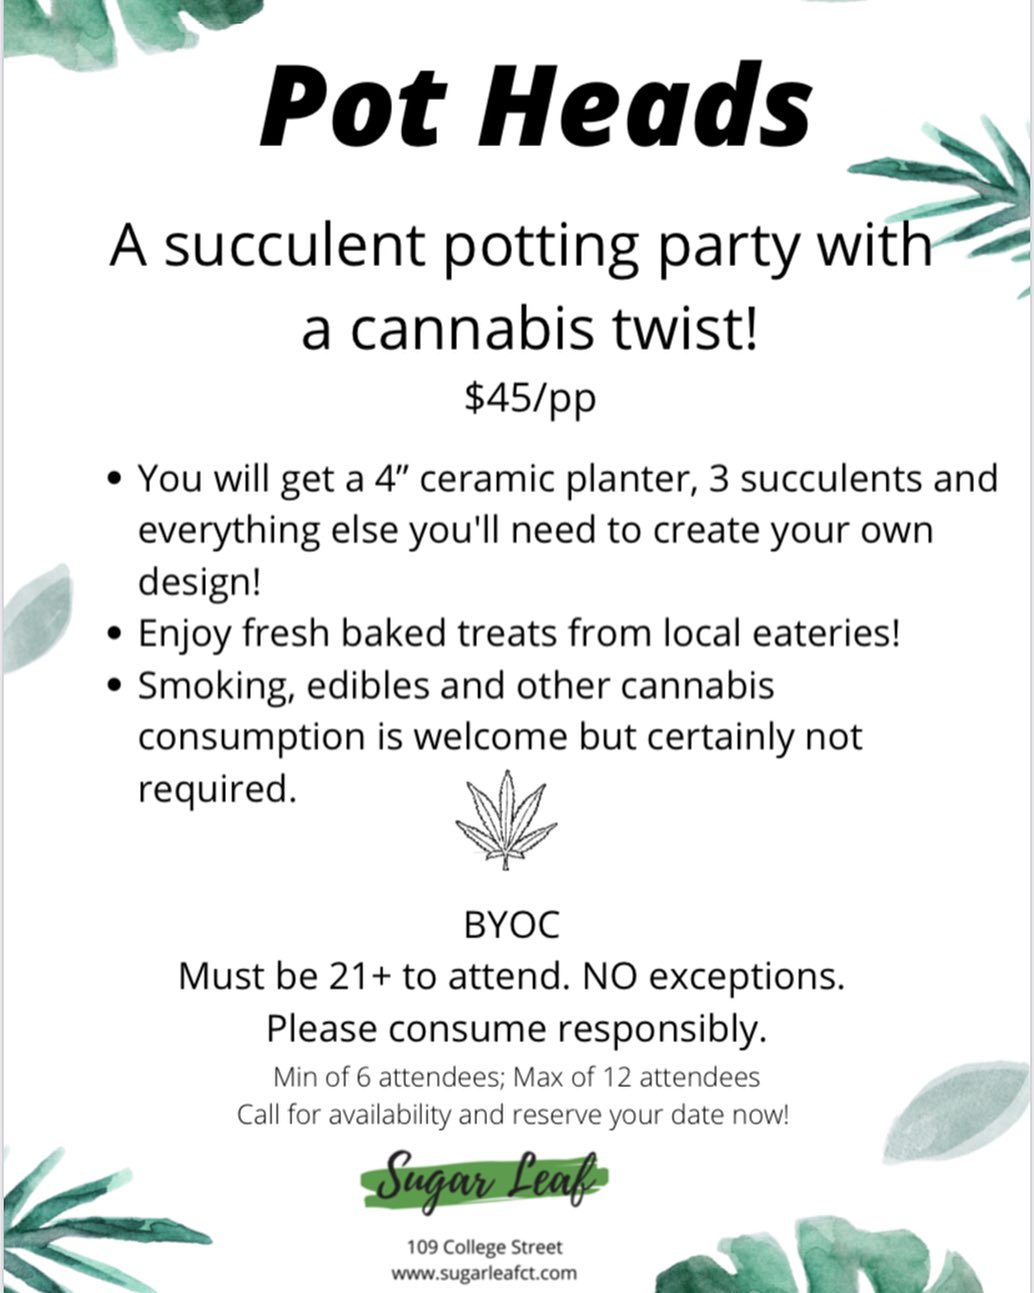 Private events with a cannabis twist!